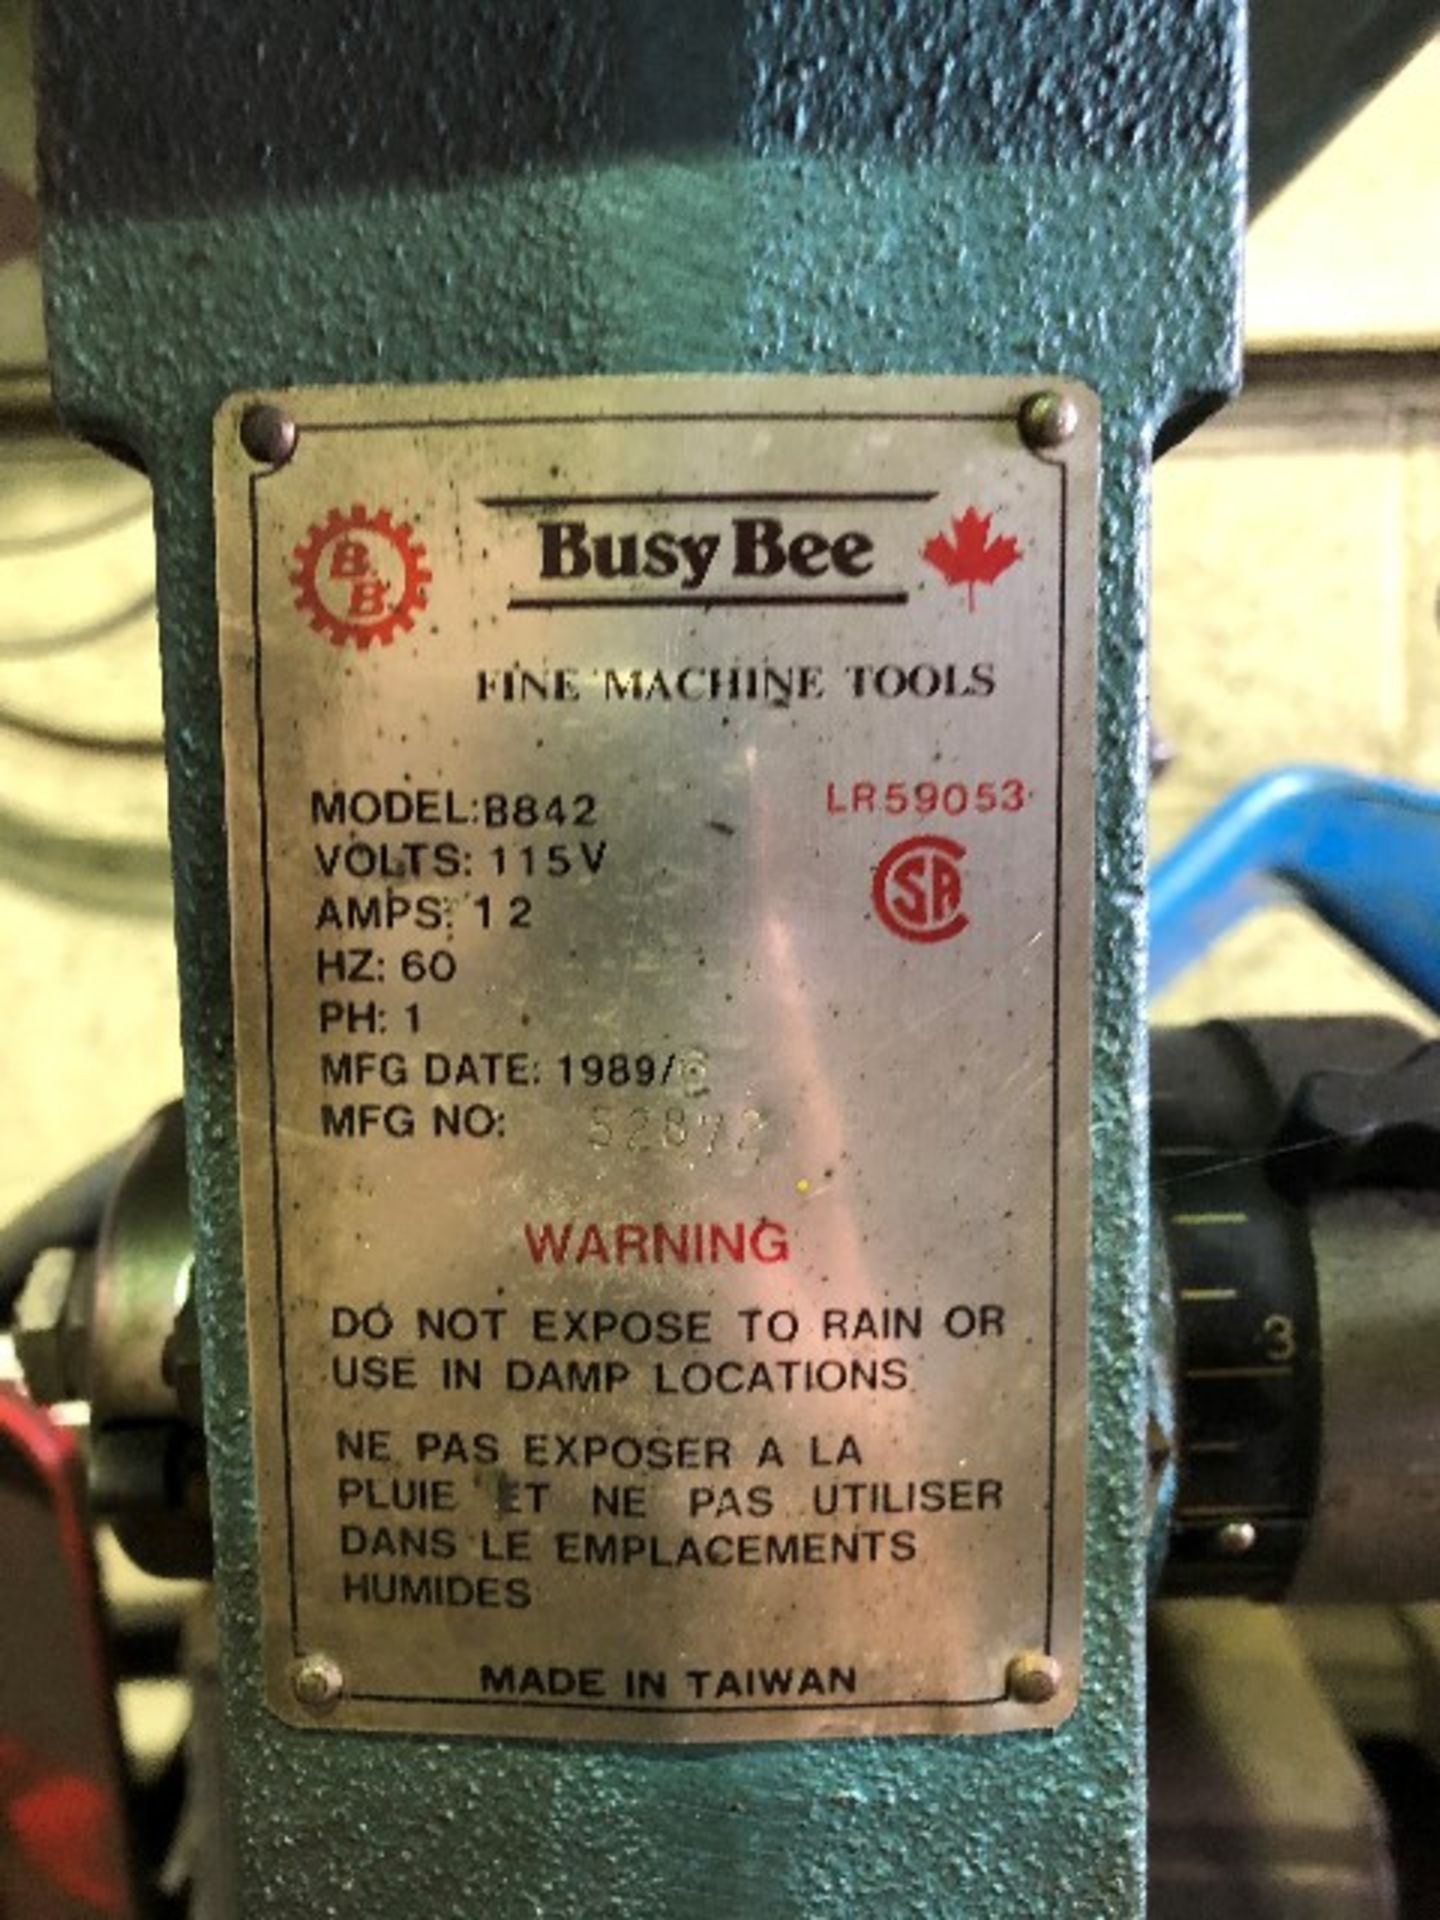 Busy Bee drill press, model:B842, 115V, 12A - Image 2 of 4